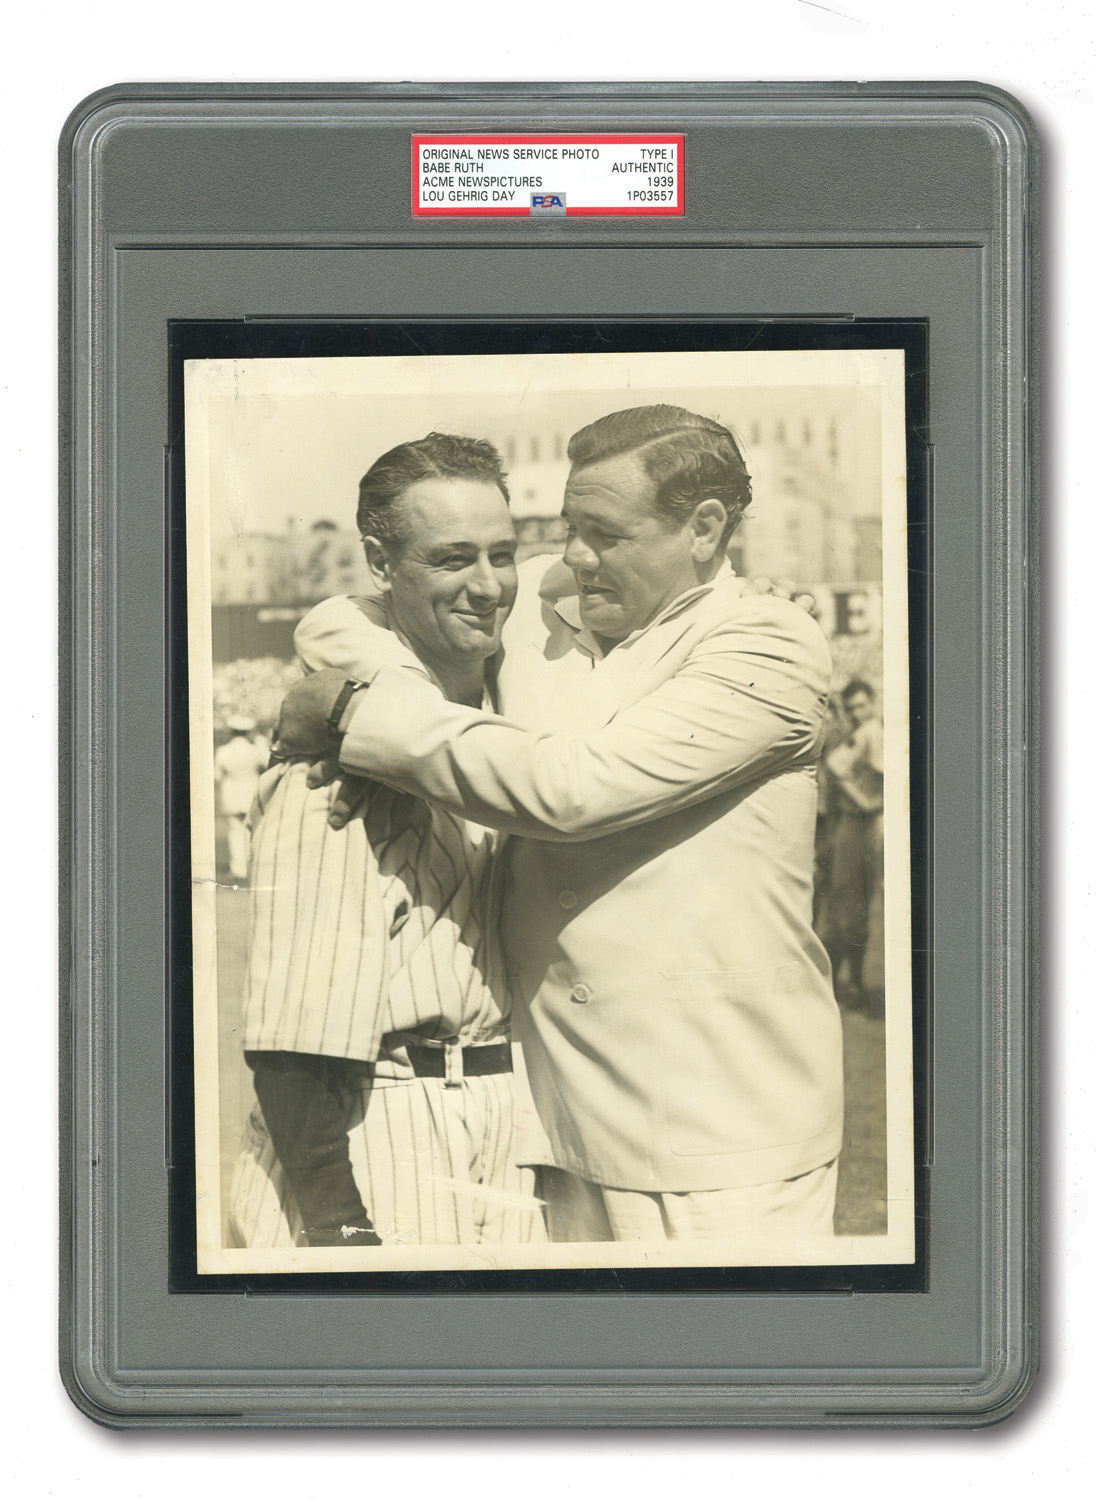 Lou Gehrig #4 and Babe Ruth #3 posed on the dugout steps circa 1932. Photo  Print - Item # VARPFSAABC034 - Posterazzi